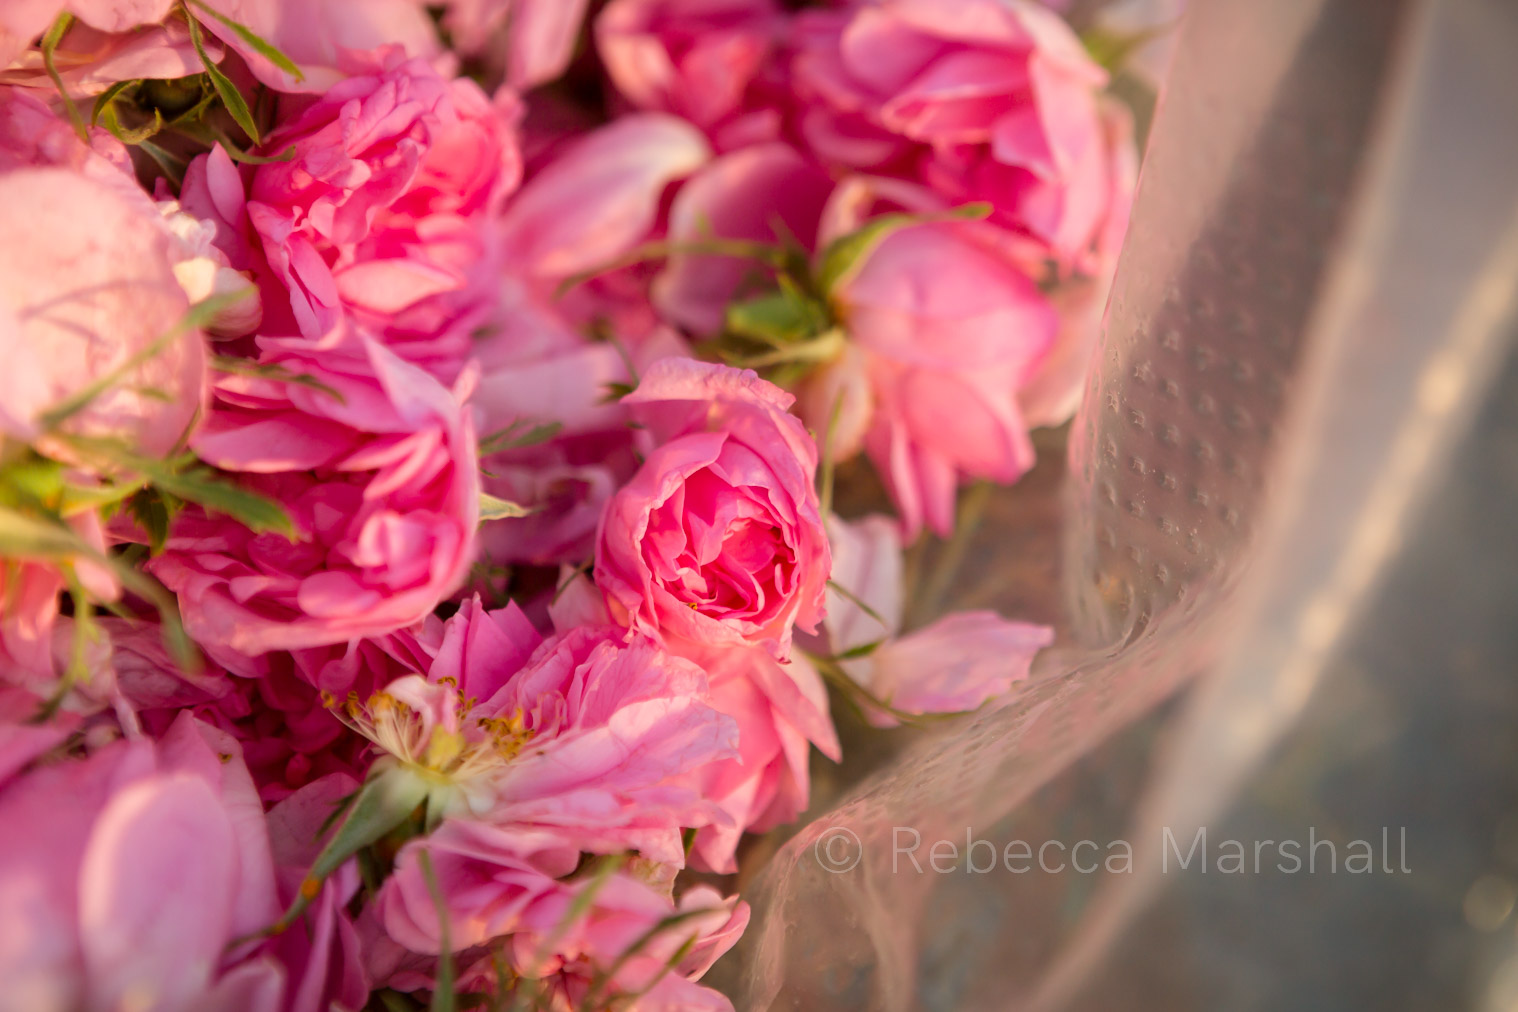 Close-up photograph of picked rose blooms in a plastic sac